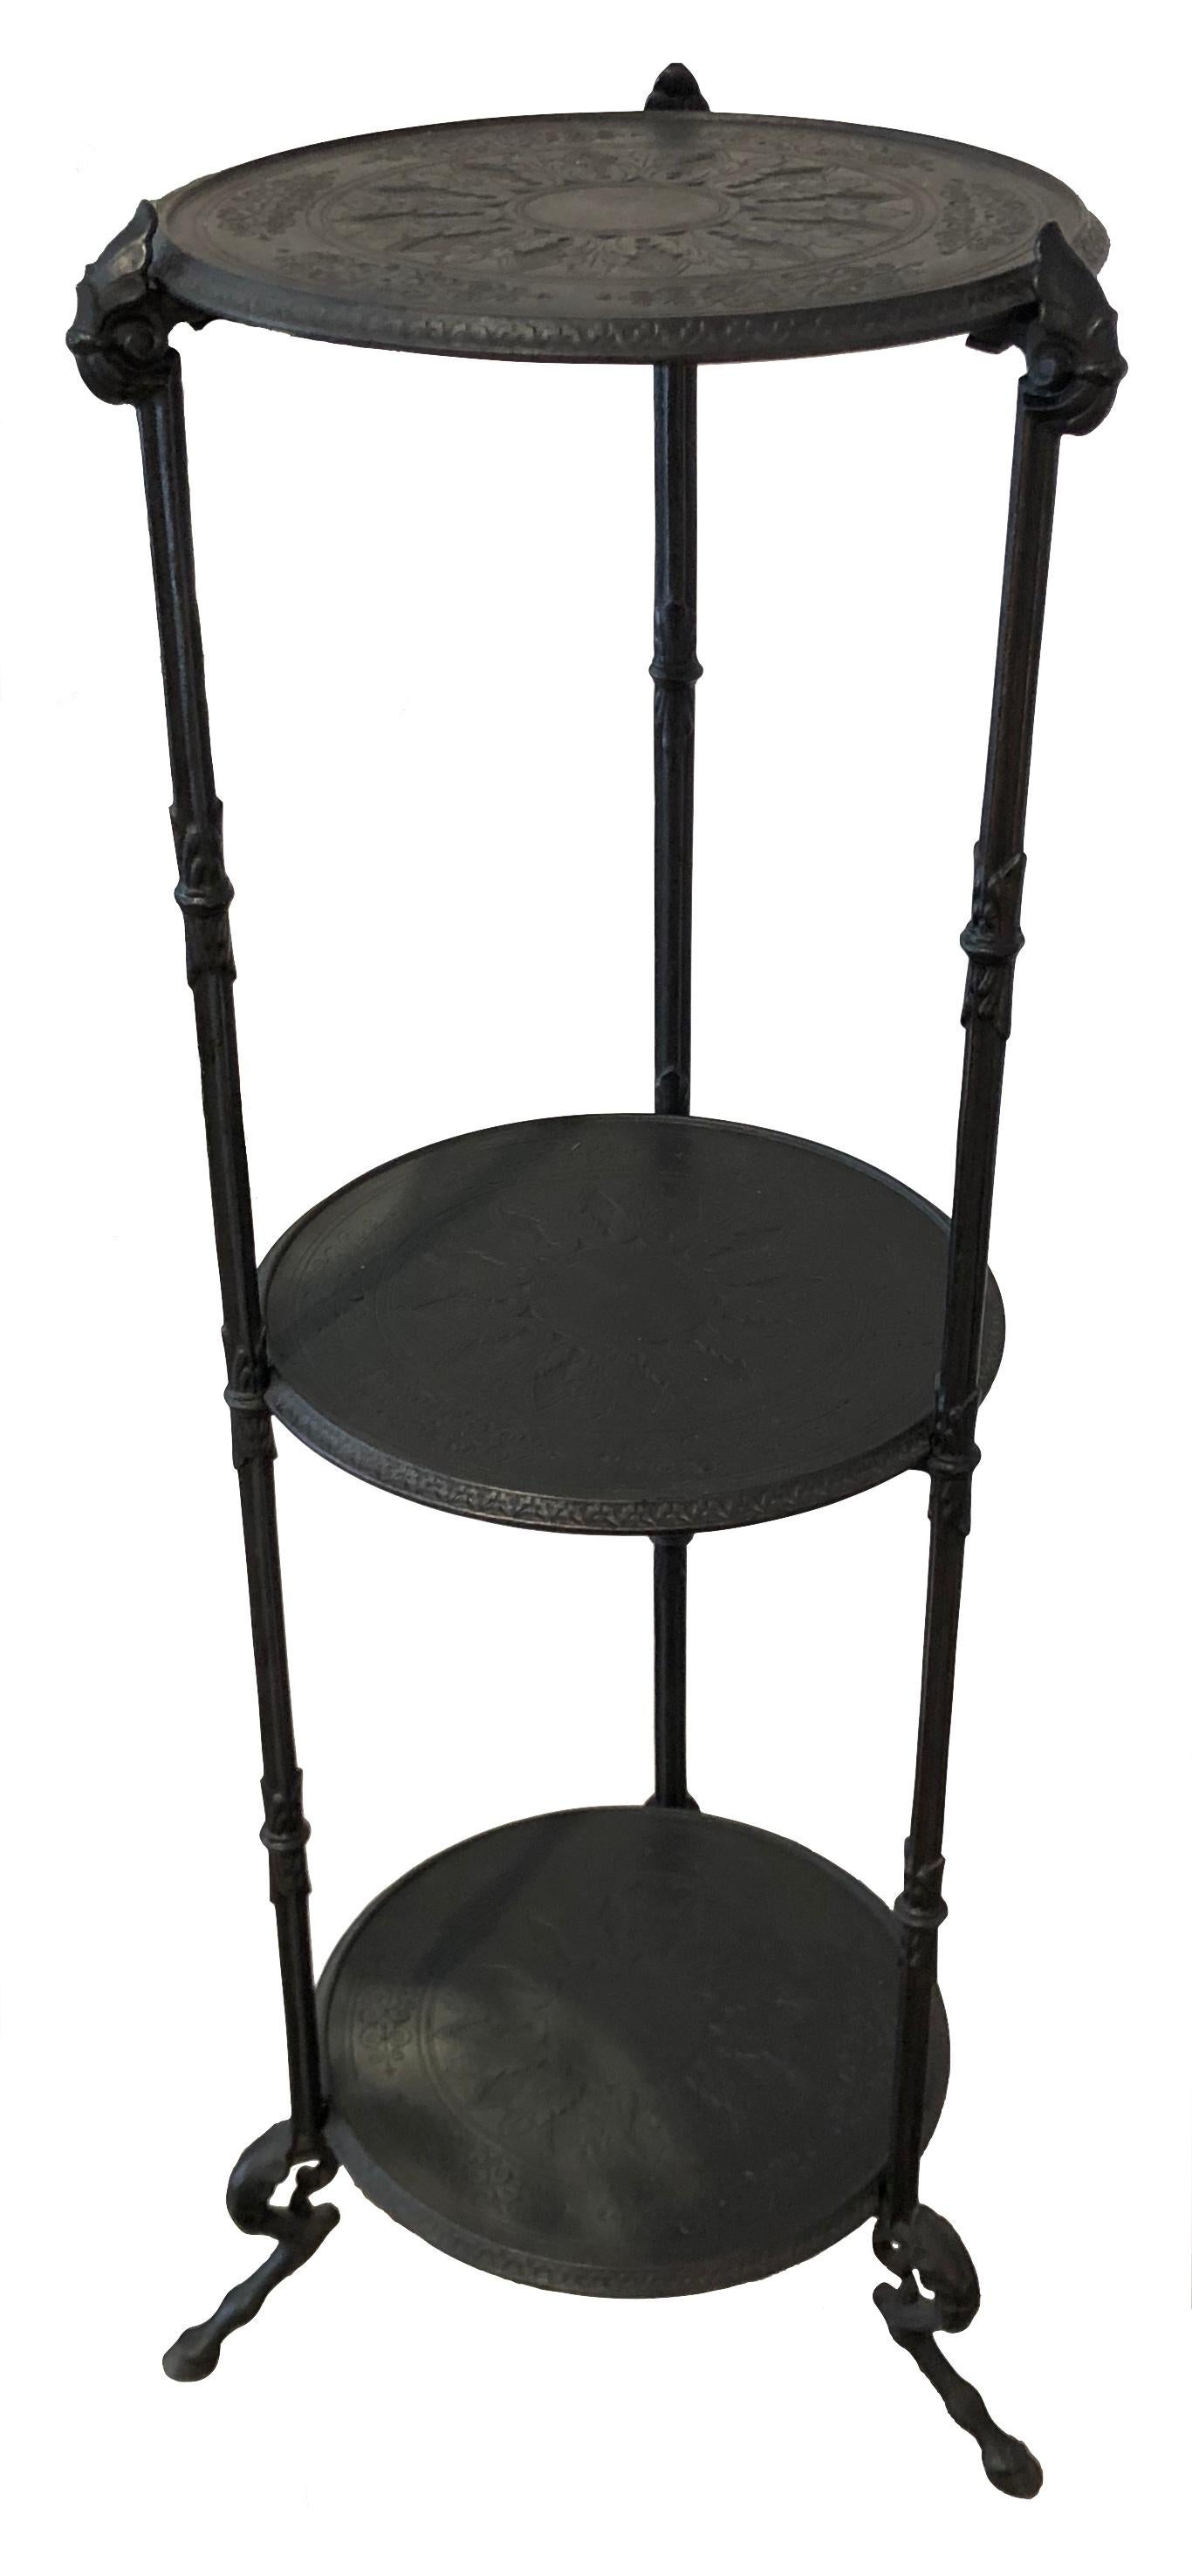 This elegant and versatile cast iron tripod side table doubles as an étagère. It features finely modelled goats feet.
The diametre of the three iron discs meassures 24.5cm. 